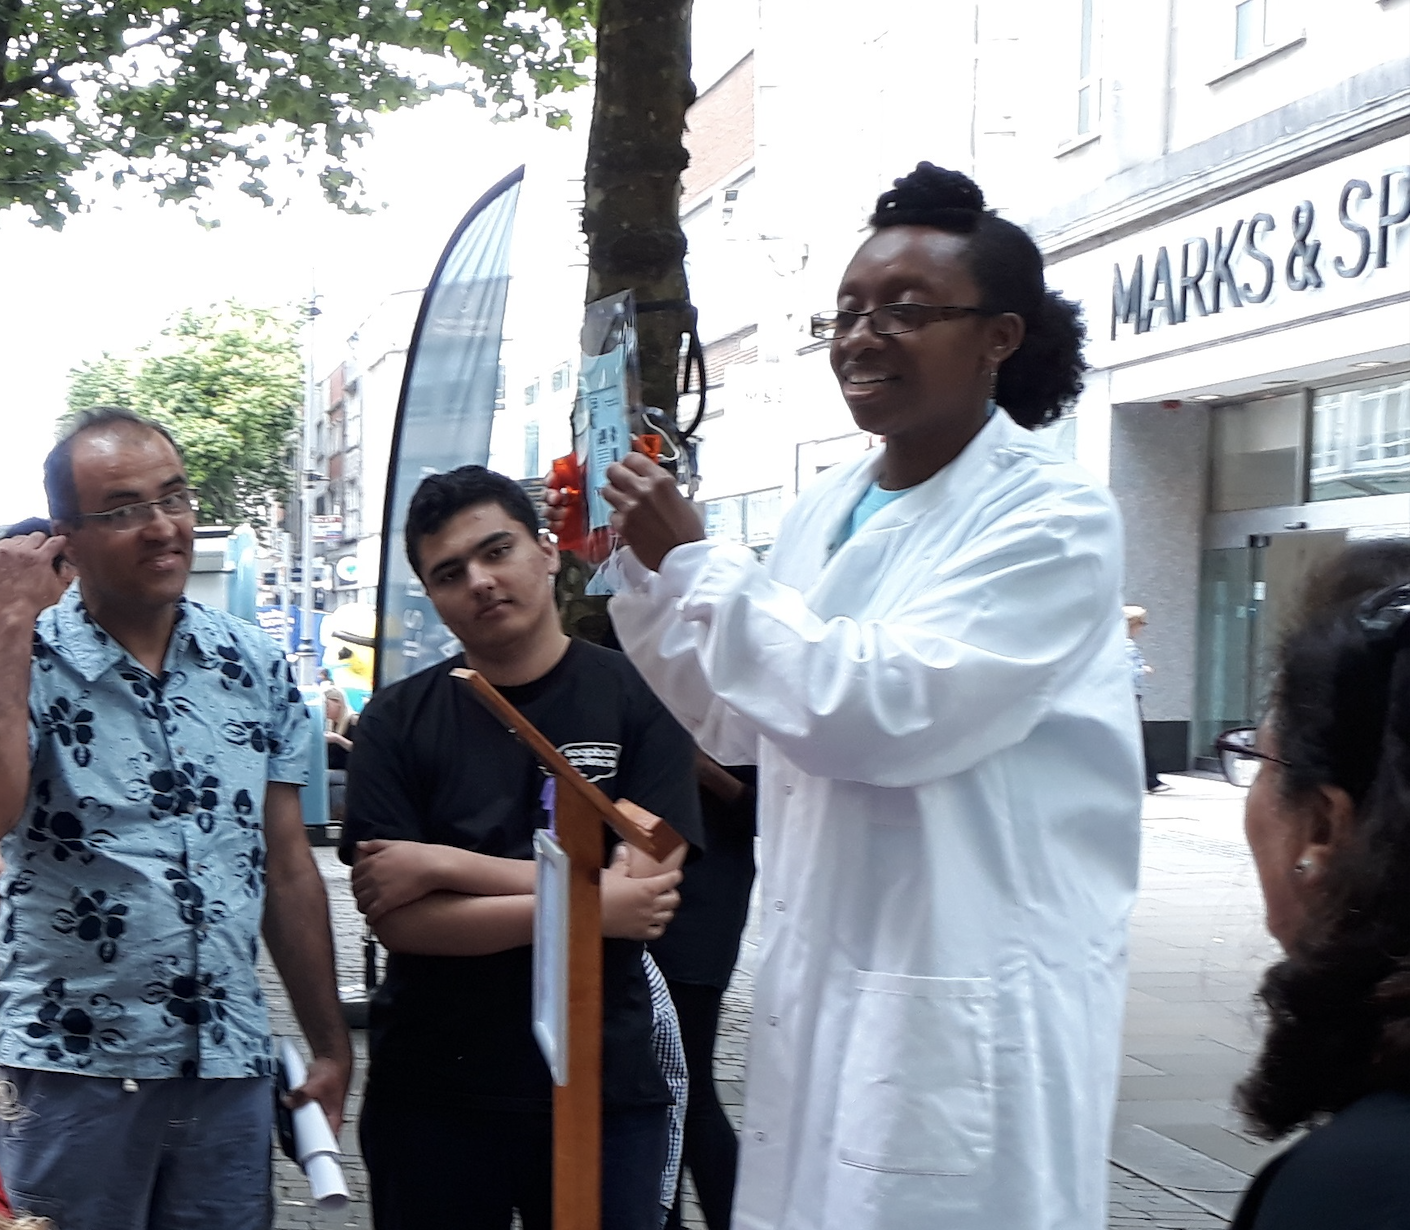 March 2: Deadline for speaker applications for 2020 Soapbox Science events